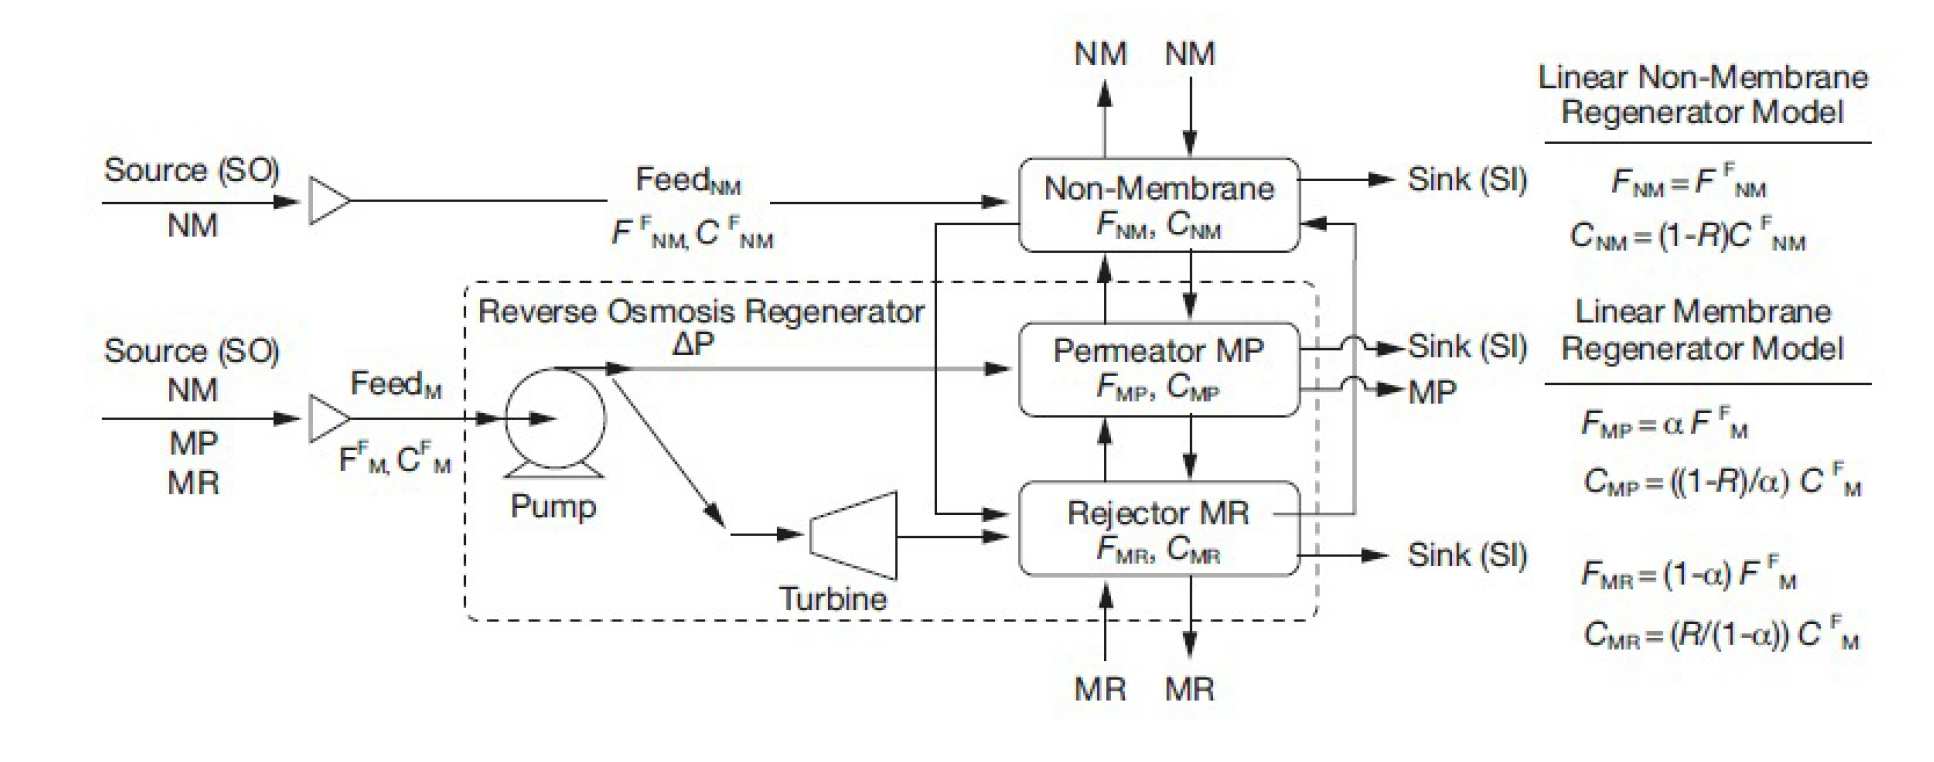 Figure 2. Superstructure (simplified) around the regenerators in water network synthesis problem Plant-wide Optimization of Existing Wastewater Treatment Plants